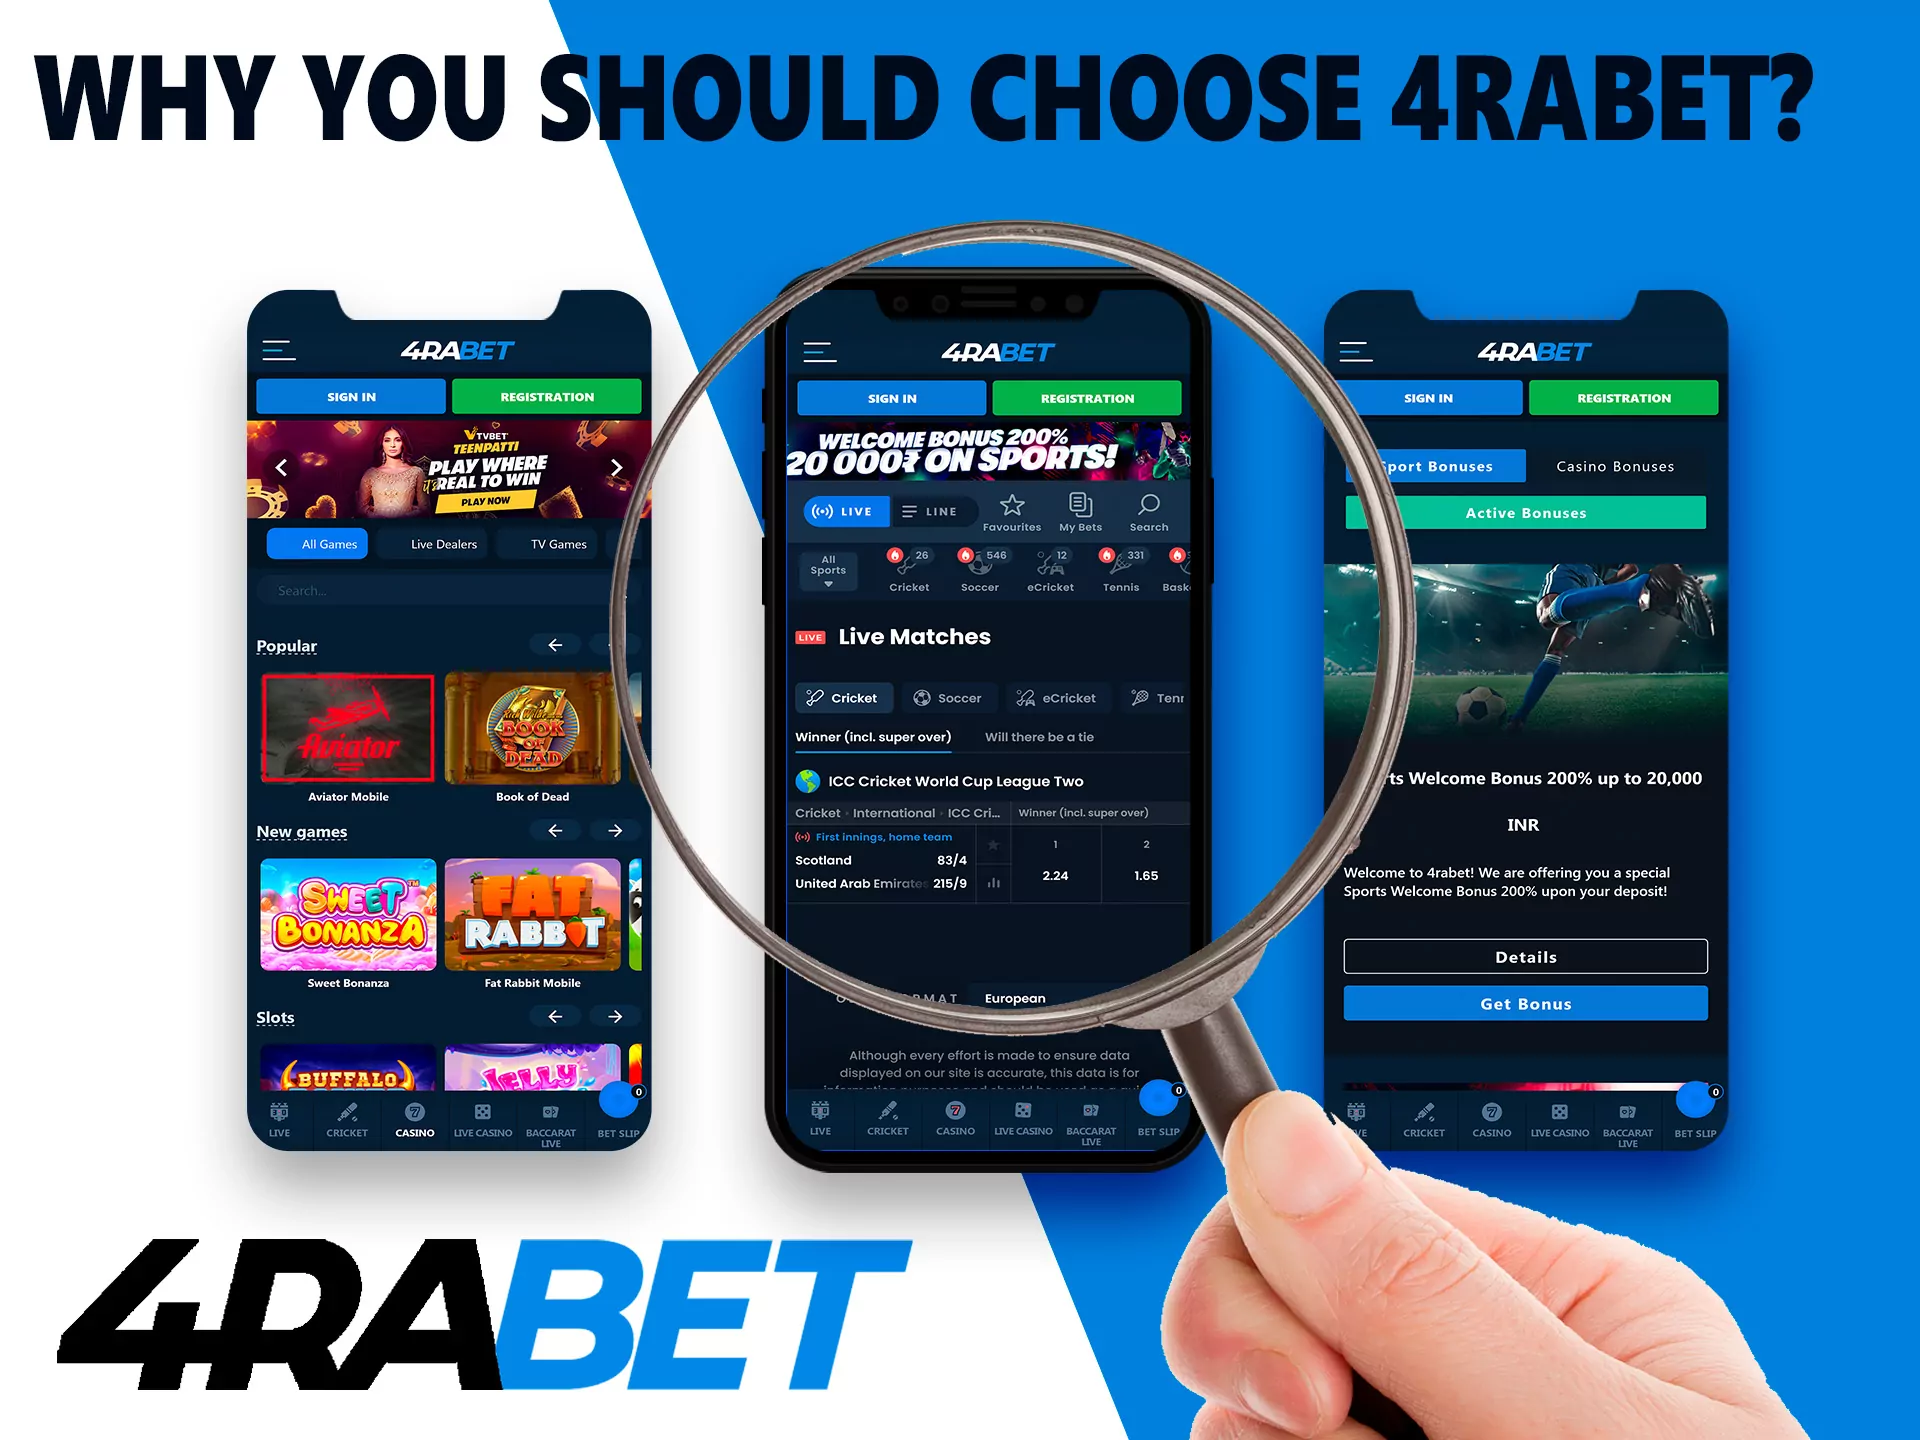 4rabet is the best choice among other bookmakers, it meets all the necessary criteria.